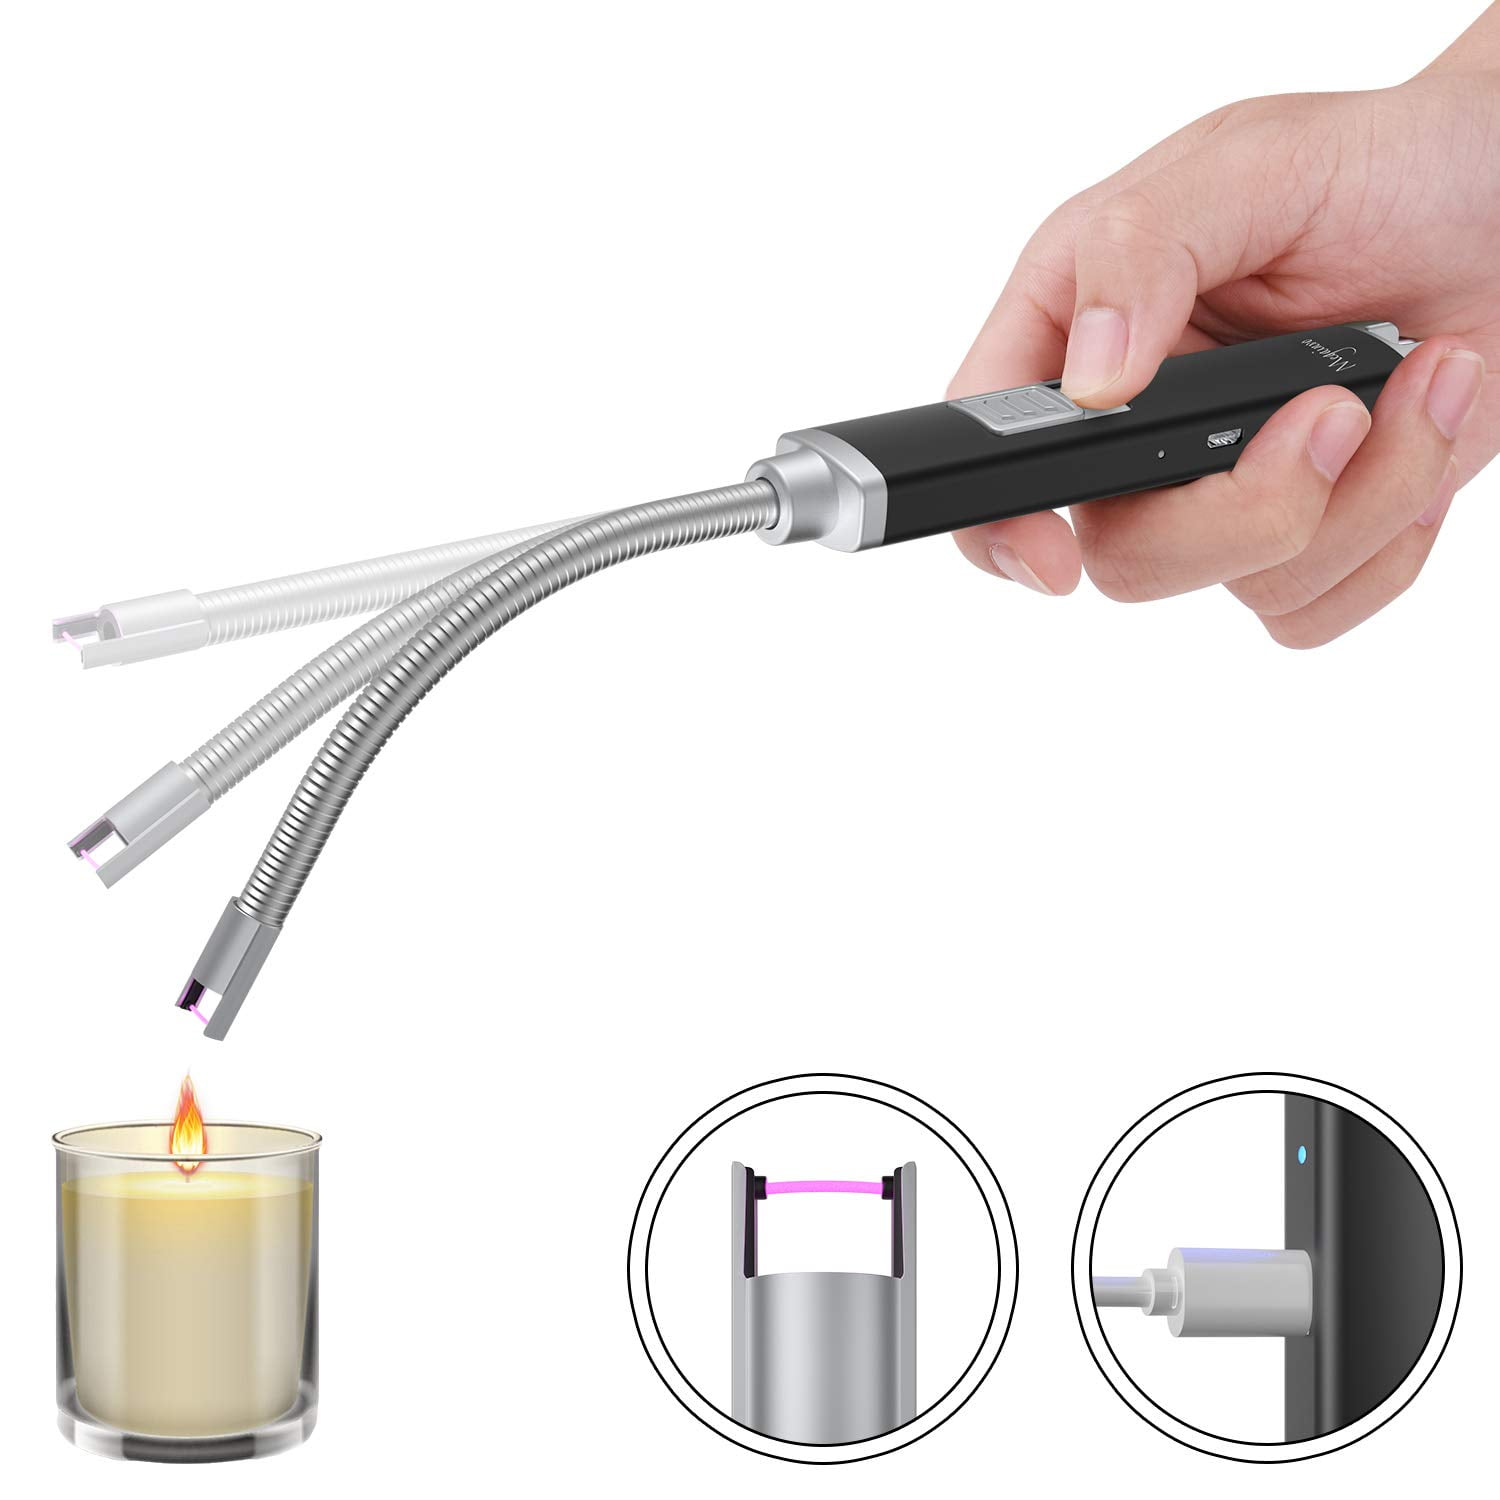 Suitable Ignite Light Candles Gas Stoves Camping Cooking Barbecue Fireworks Flame Jsdoin Candle Lighter Upgraded USB Charging Arc Lighter with 360° Flexible Neck Blue 